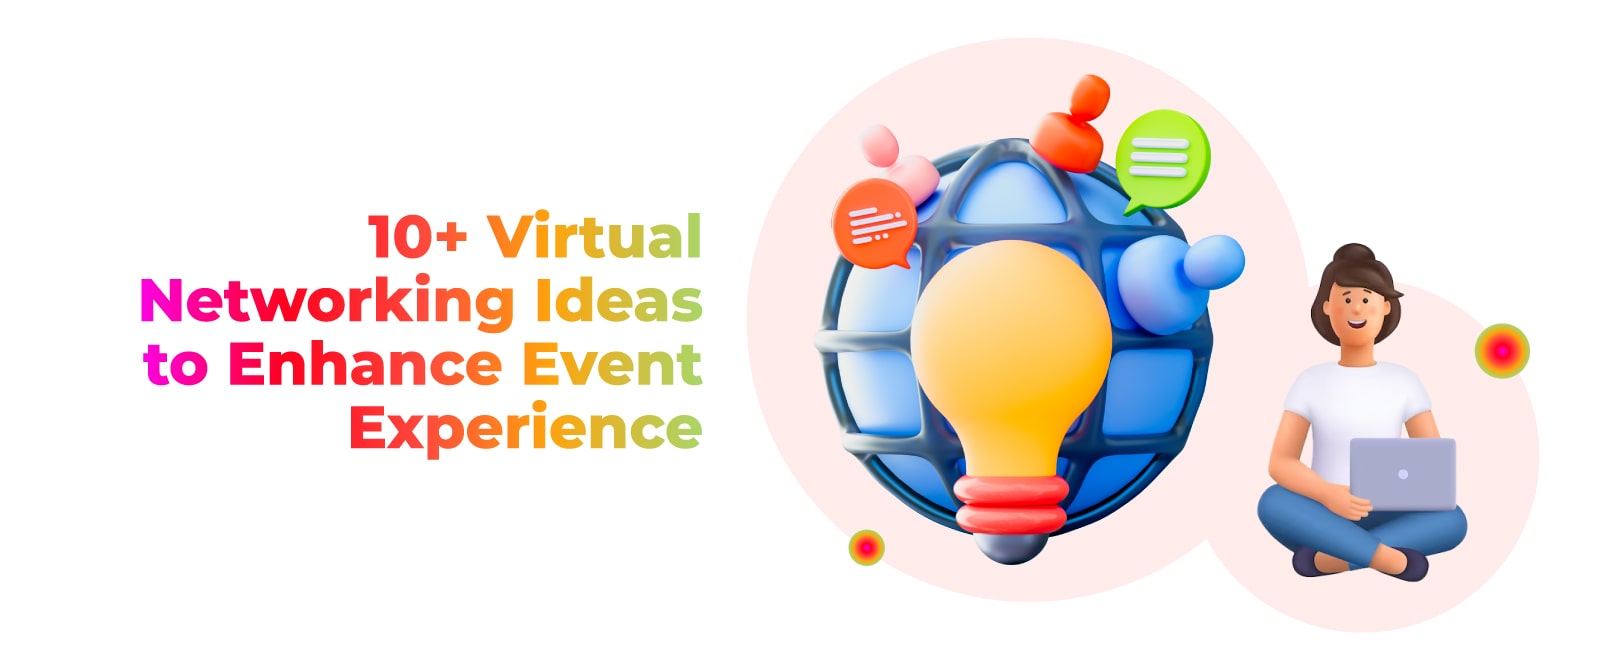 10+ Virtual Networking Ideas to Enhance Event Experience